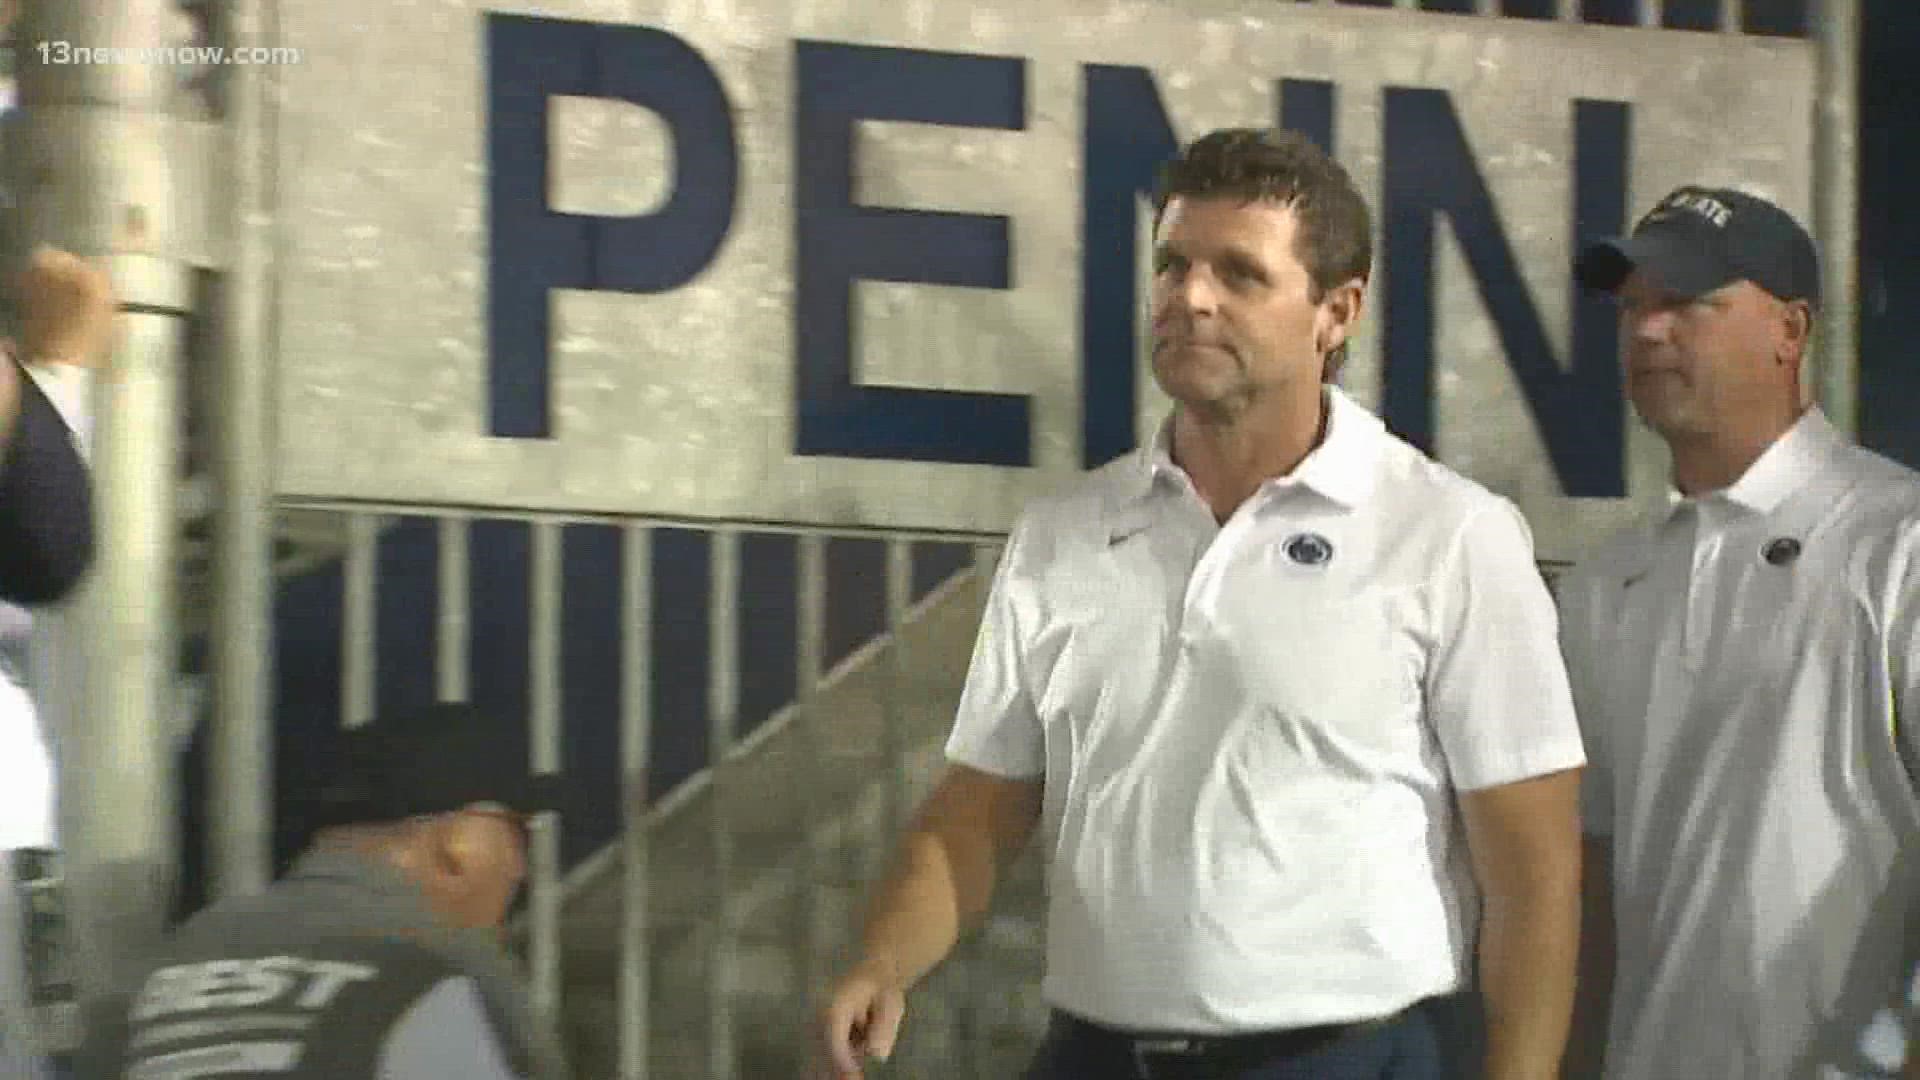 Tech named Pry, the current Penn State defensive coordinator as the next man in charge in Blacksburg.